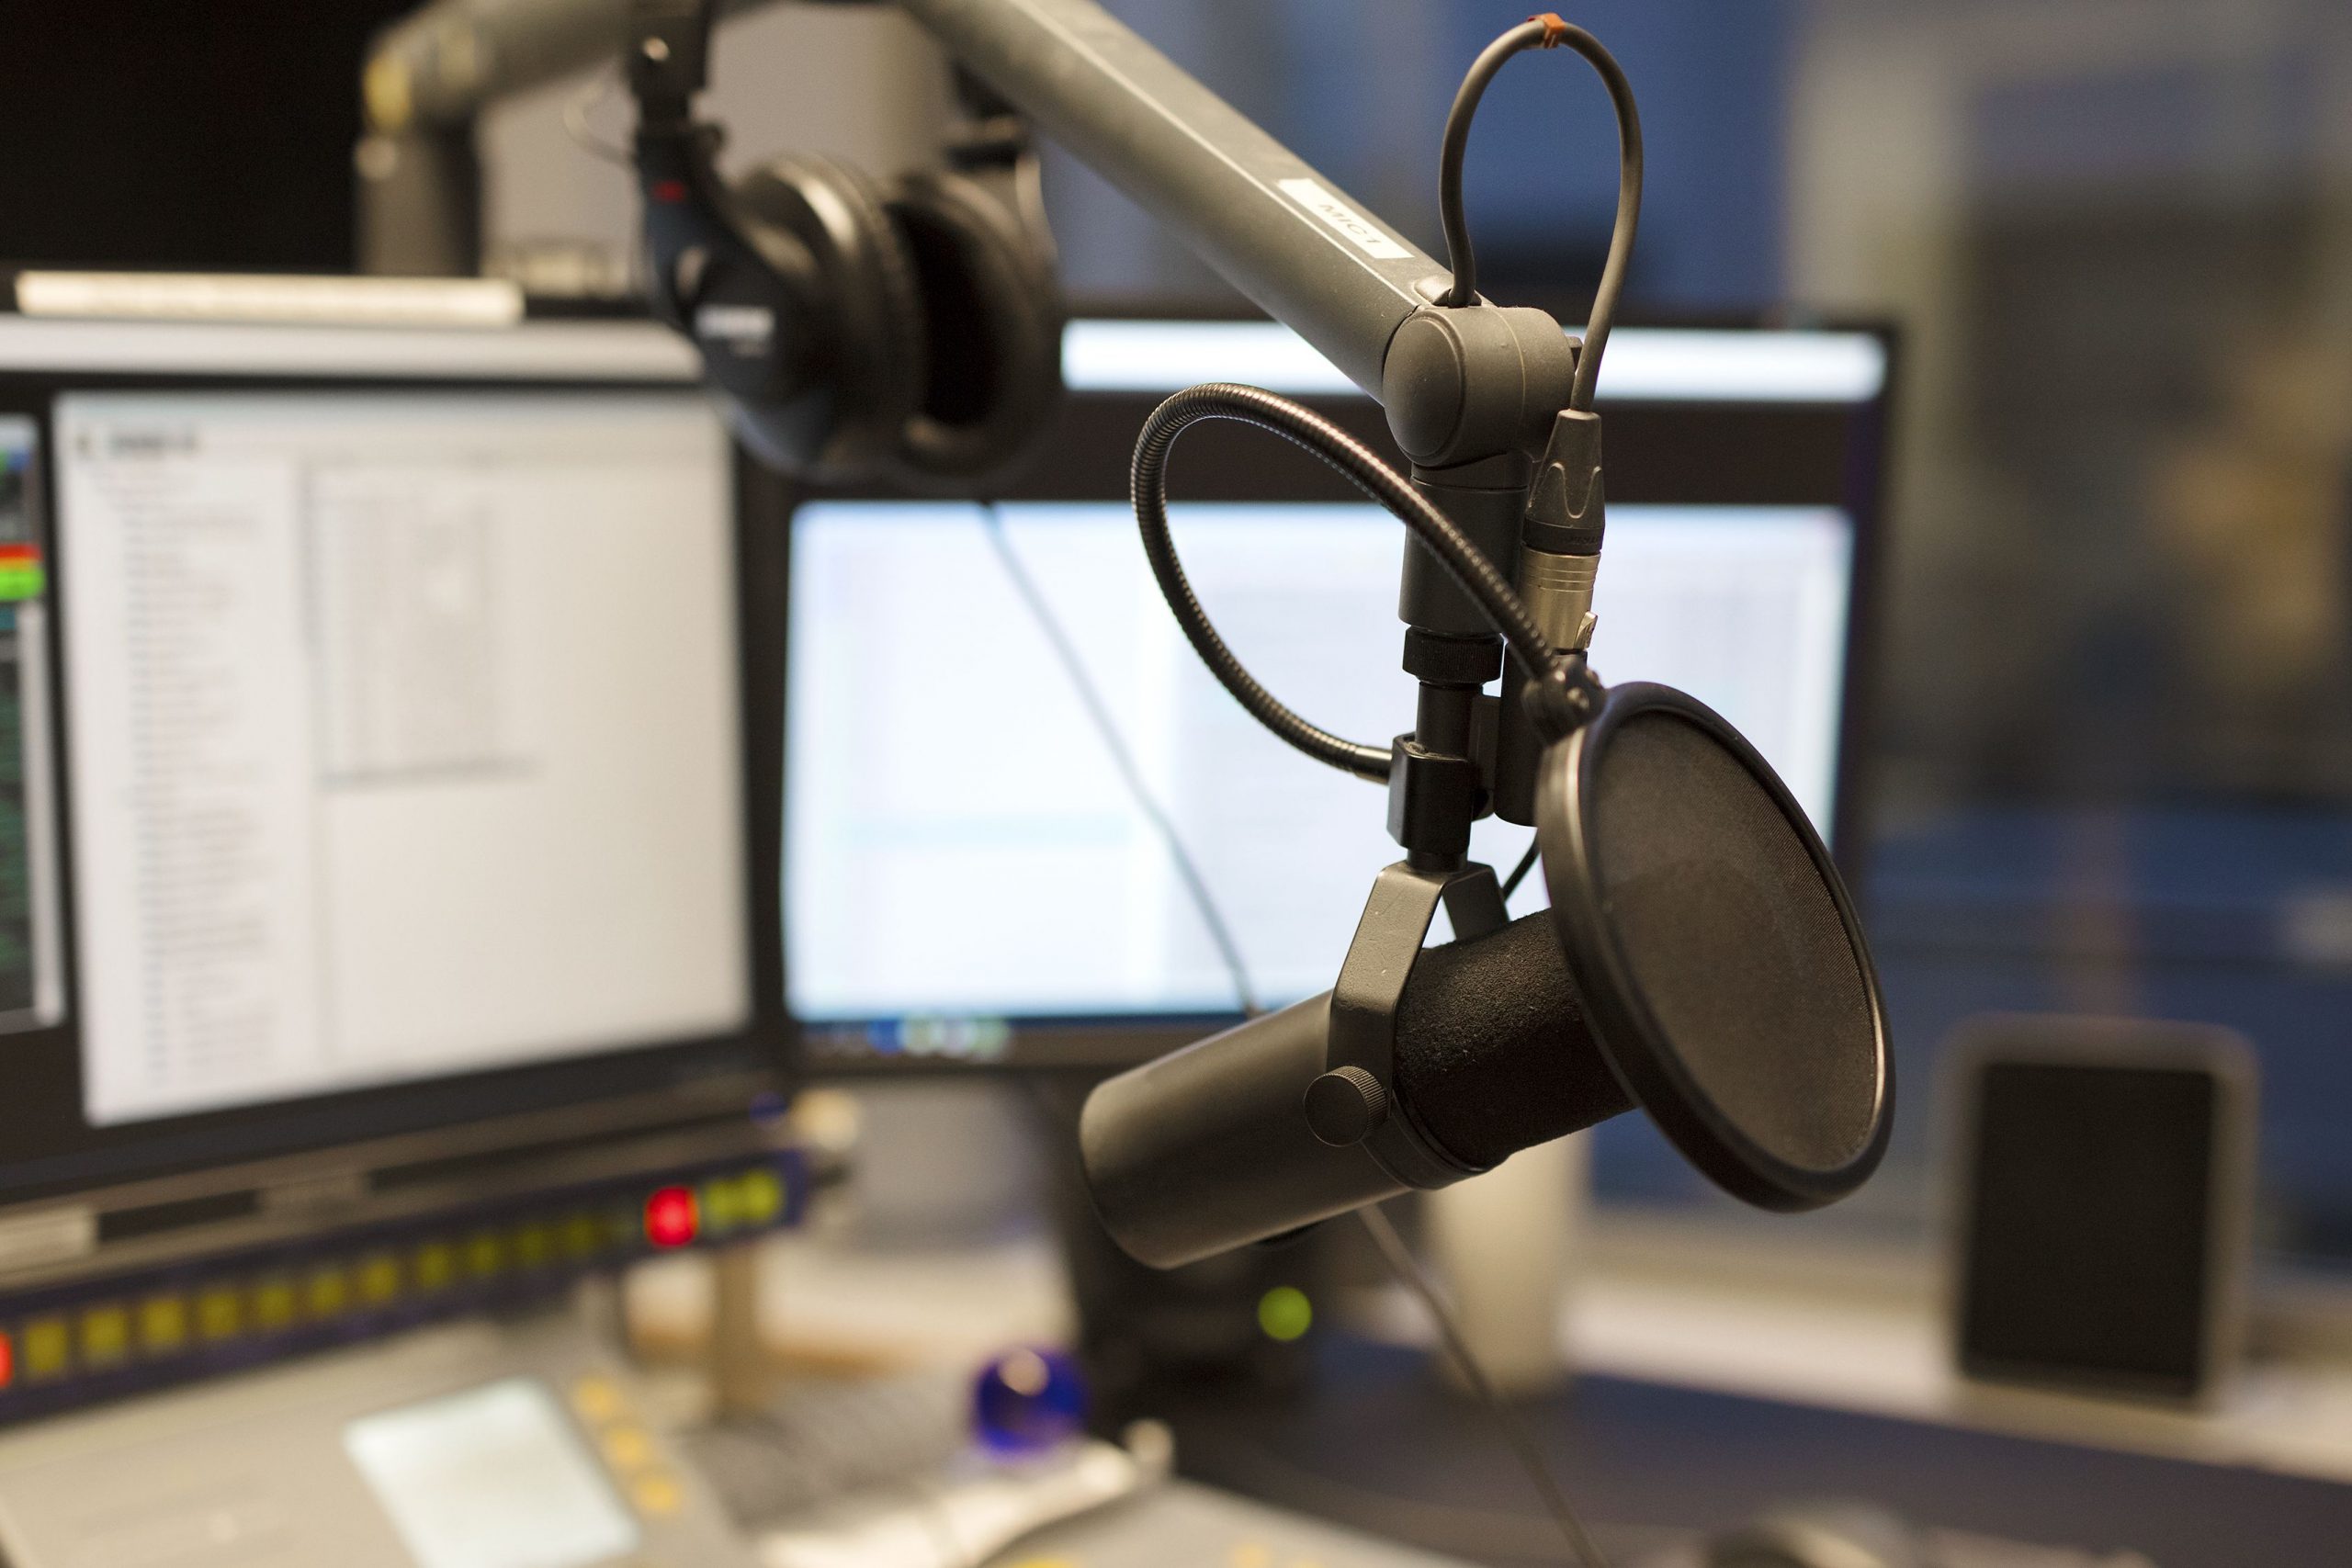 a studio microphone at a desk with computer monitors in the background